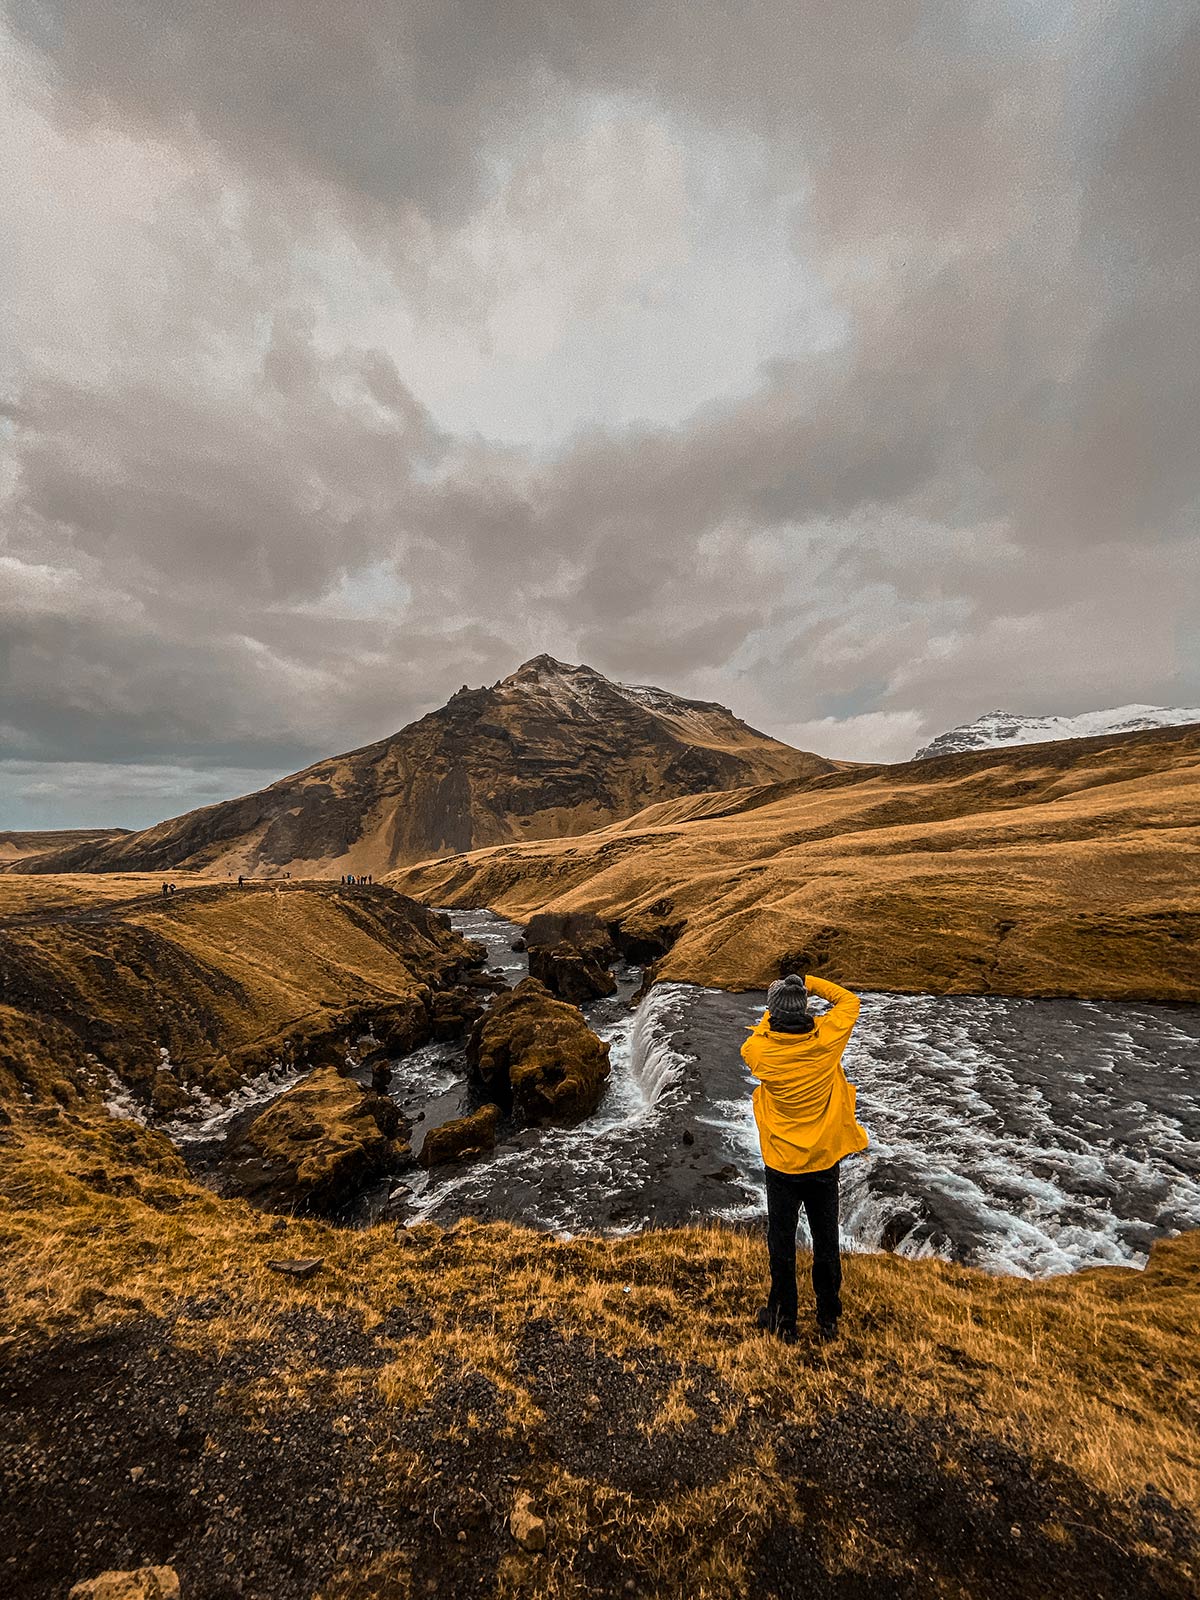 David Simpson taking photos of mountain in Iceland. My first blog post